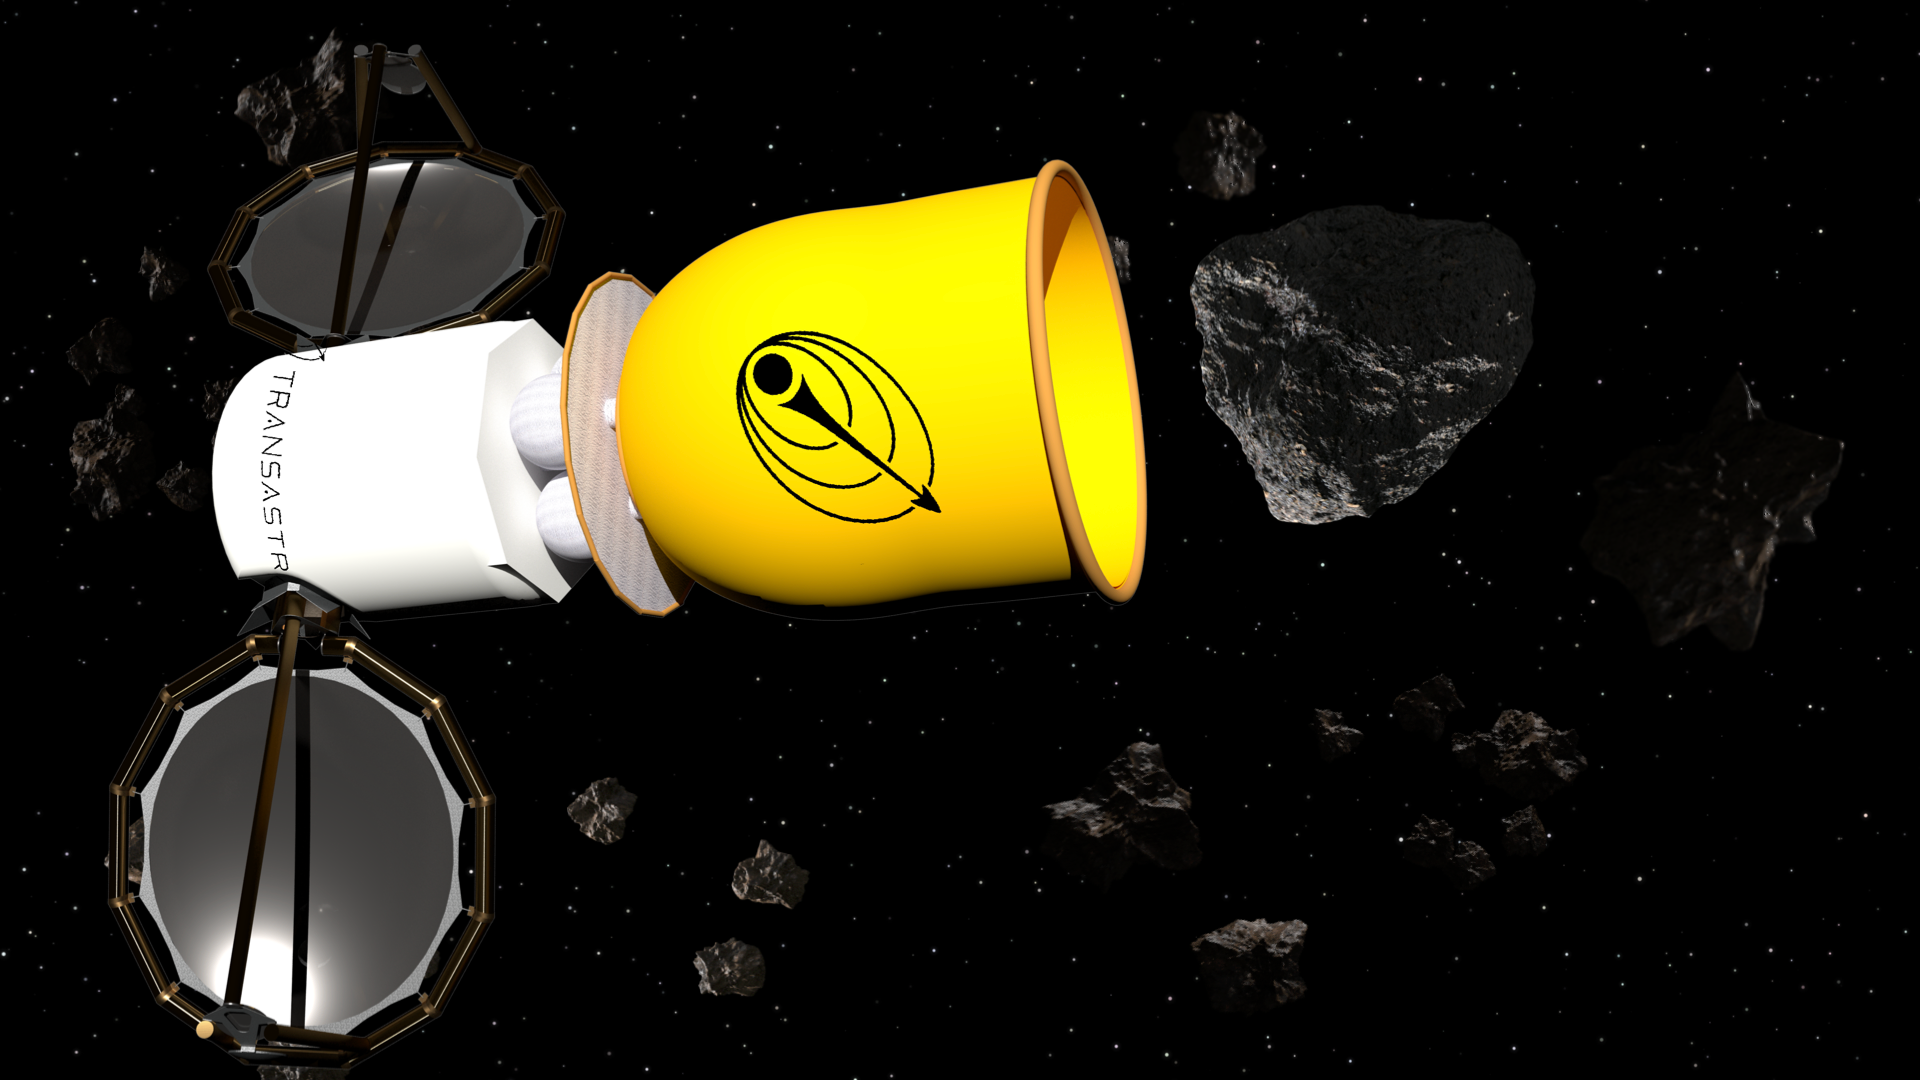 A conceptual illustration of a TransAstra Worker Bee craft on its first asteroid mining flight mission.